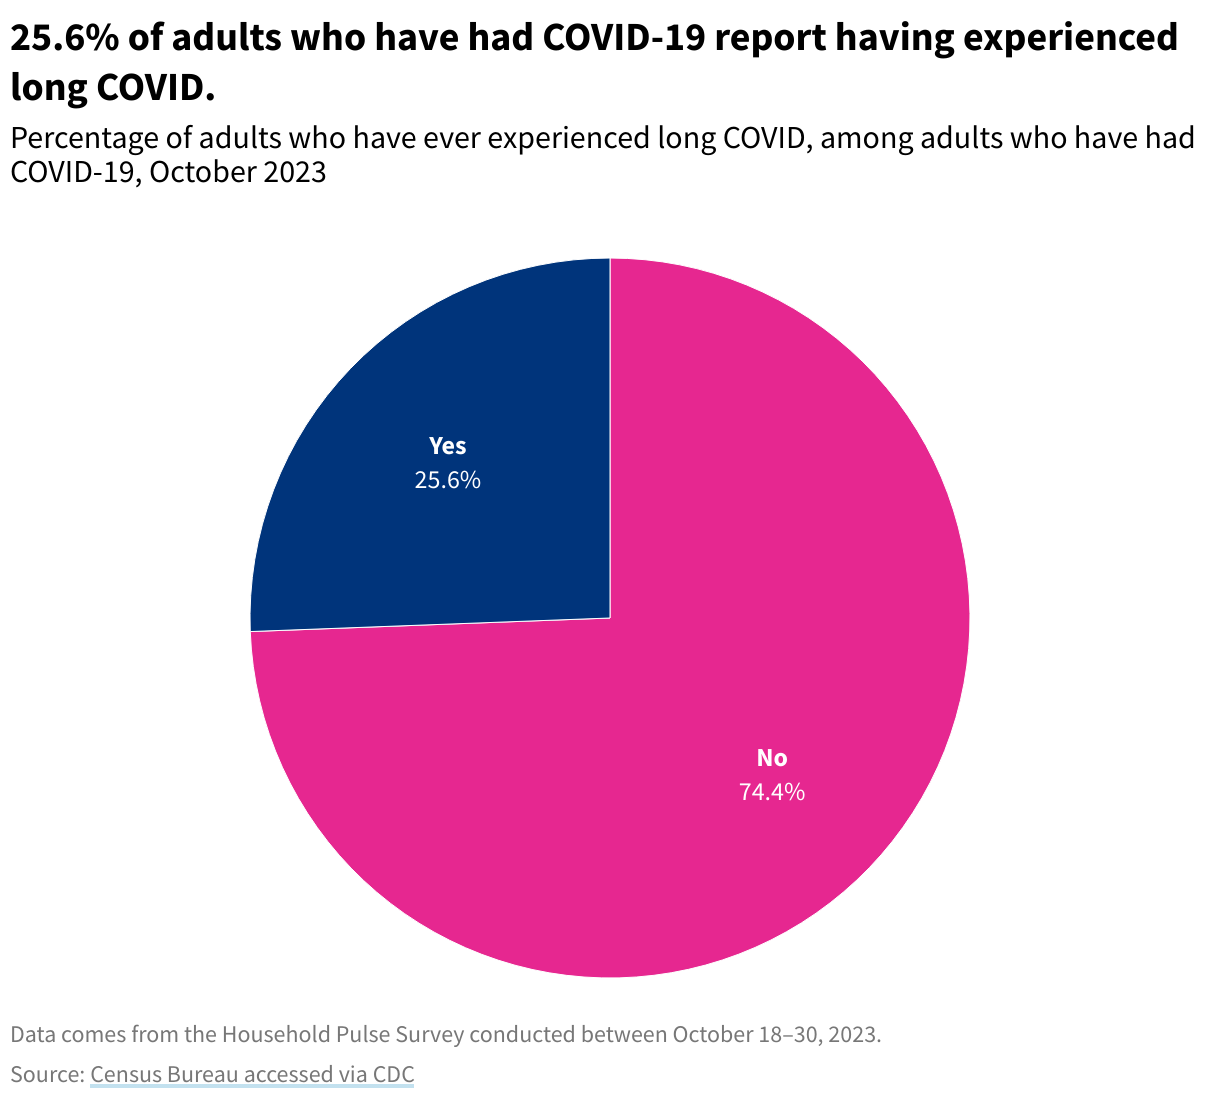 Percentage of adults who have ever experienced long COVID, among adults who have had COVID-19. 25.6% of adults who have gotten COVID-19 report having experienced long COVID as of October 2023.